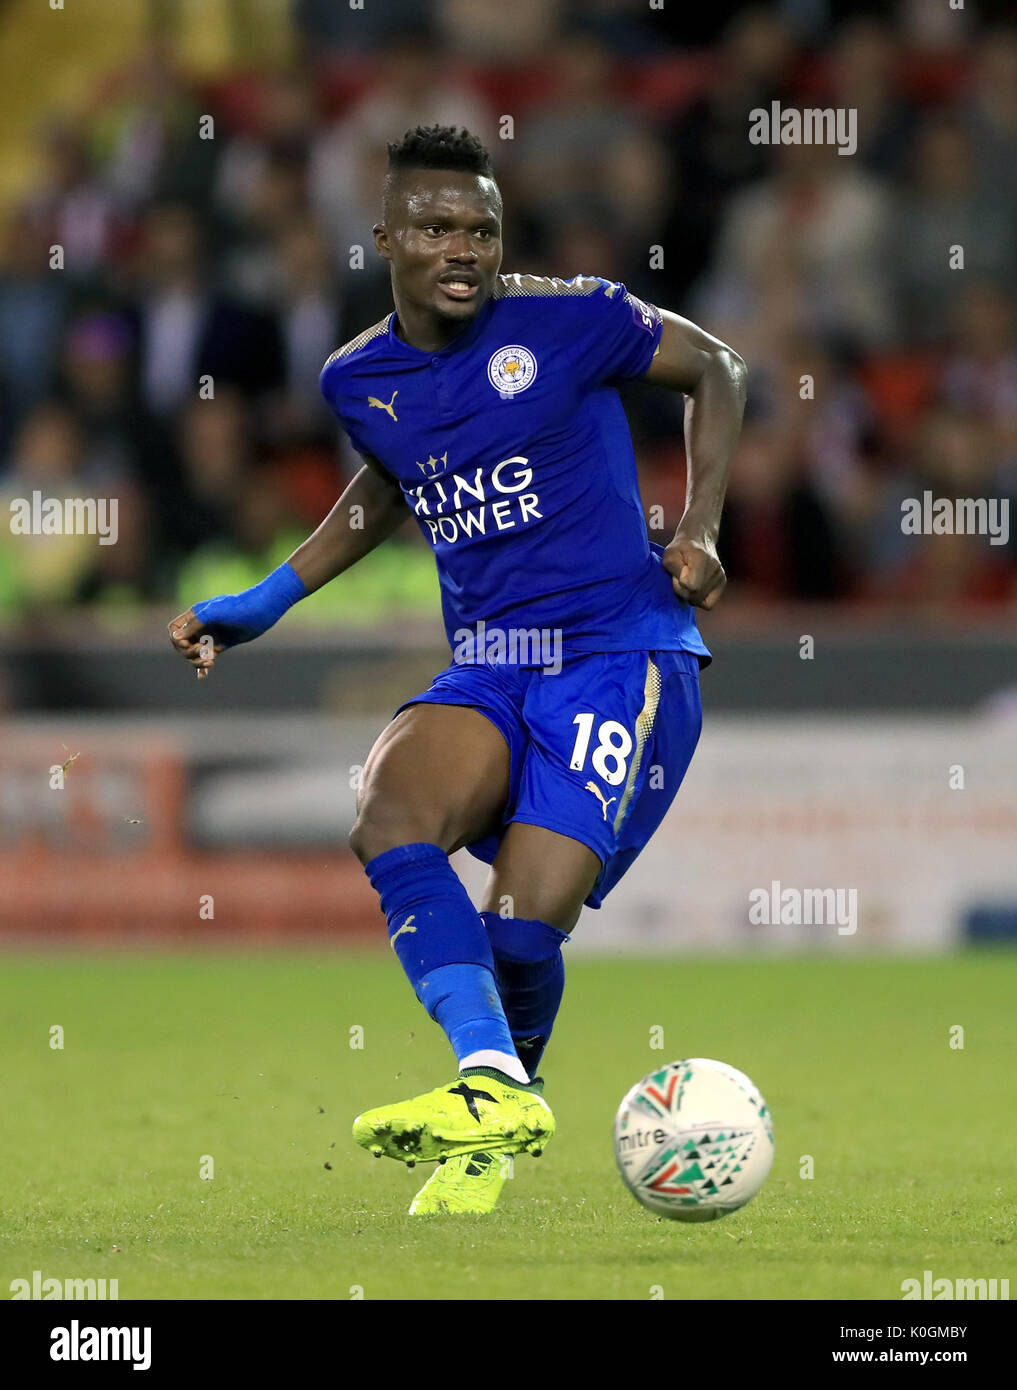 Leicester City's Daniel Amartey during the Carabao Cup, Second Round match at Bramall Lane, Sheffield. PRESS ASSOCIATION Photo. Picture date: Tuesday August 22, 2017. See PA story SOCCER Sheff Utd. Photo credit should read: Tim Goode/PA Wire. RESTRICTIONS: No use with unauthorised audio, video, data, fixture lists, club/league logos or 'live' services. Online in-match use limited to 75 images, no video emulation. No use in betting, games or single club/league/player publications. Stock Photo